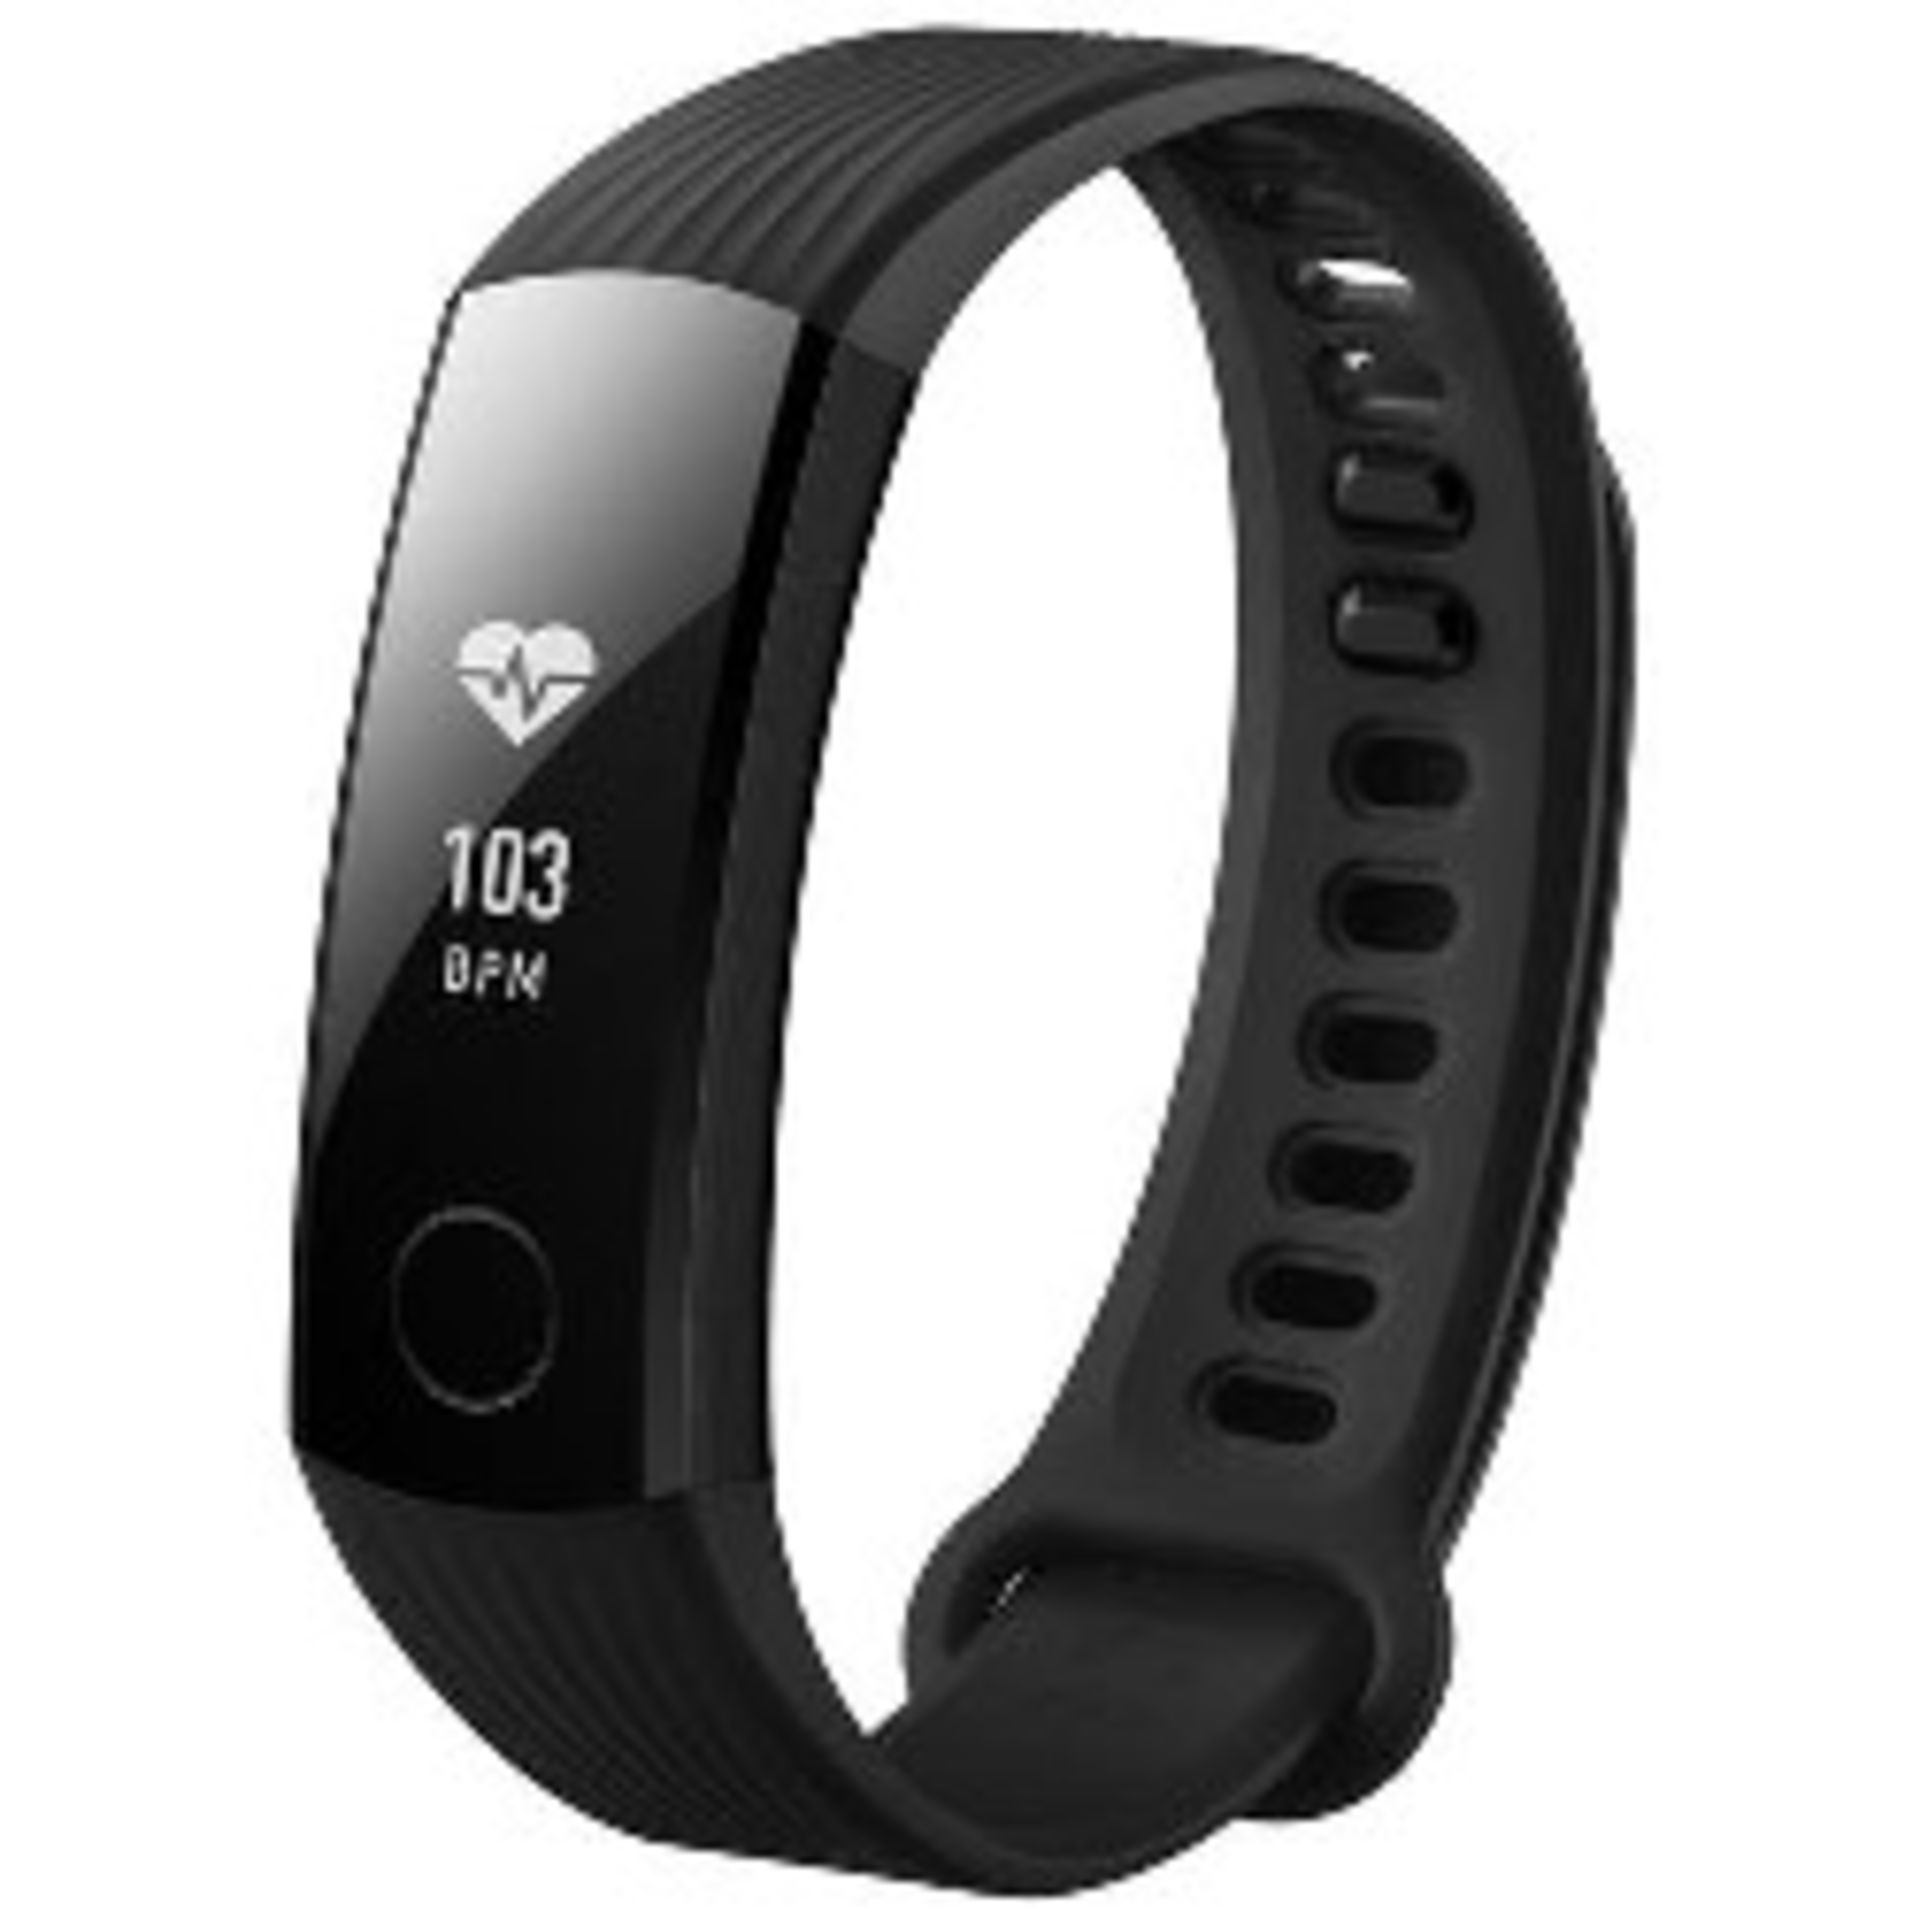 A boxed as new Huawei Honor 3 Smart Watch, Fitness and Activity Tracker in Black. Supports Android